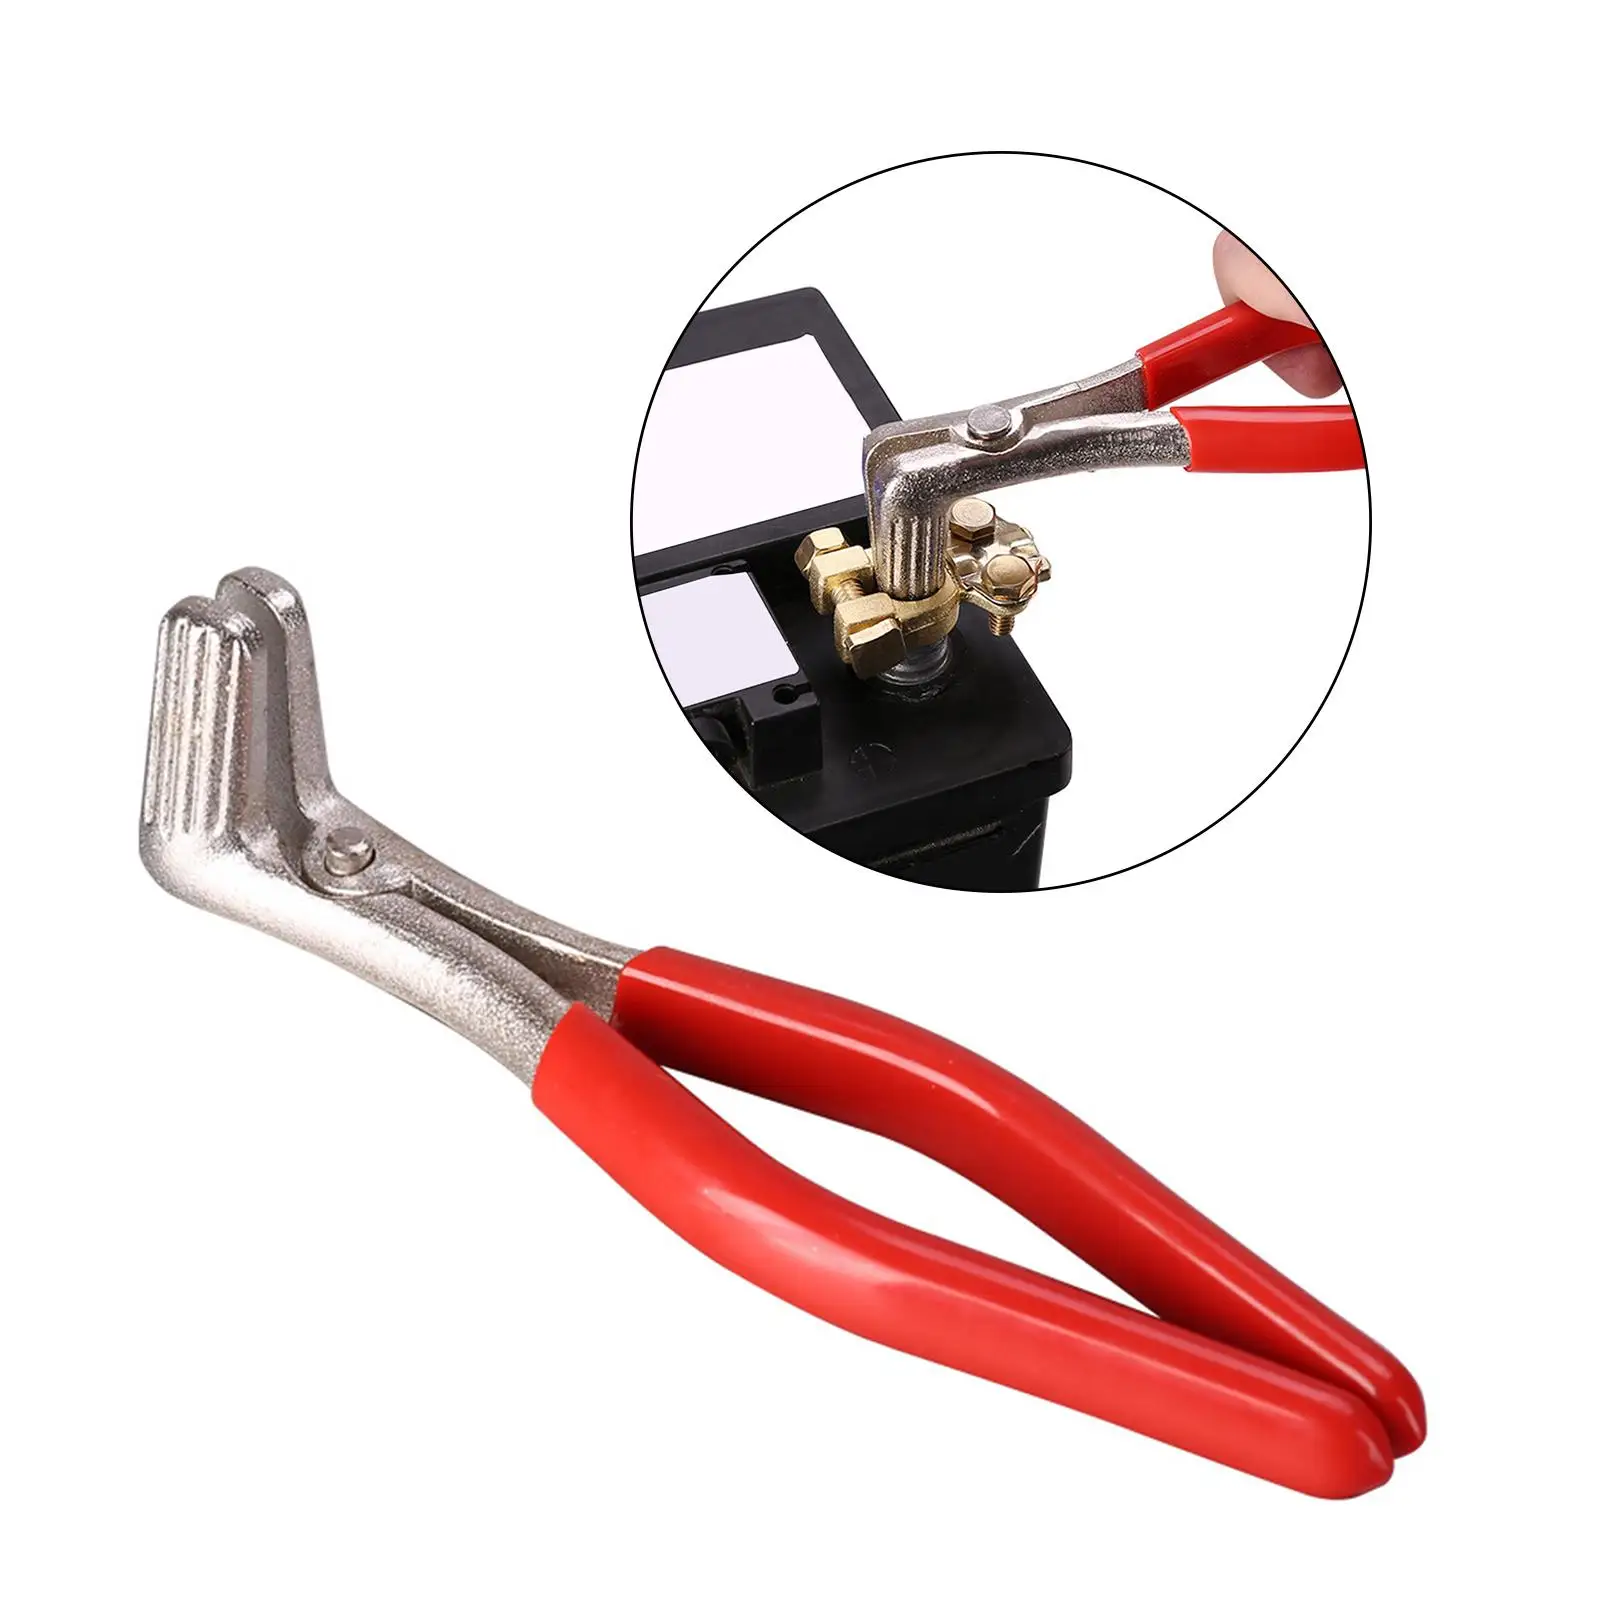 Car Battery Terminal Pliers Portable Practical Car Battery Terminal Spreader Pliers for Truck Tractor Boat Fitments